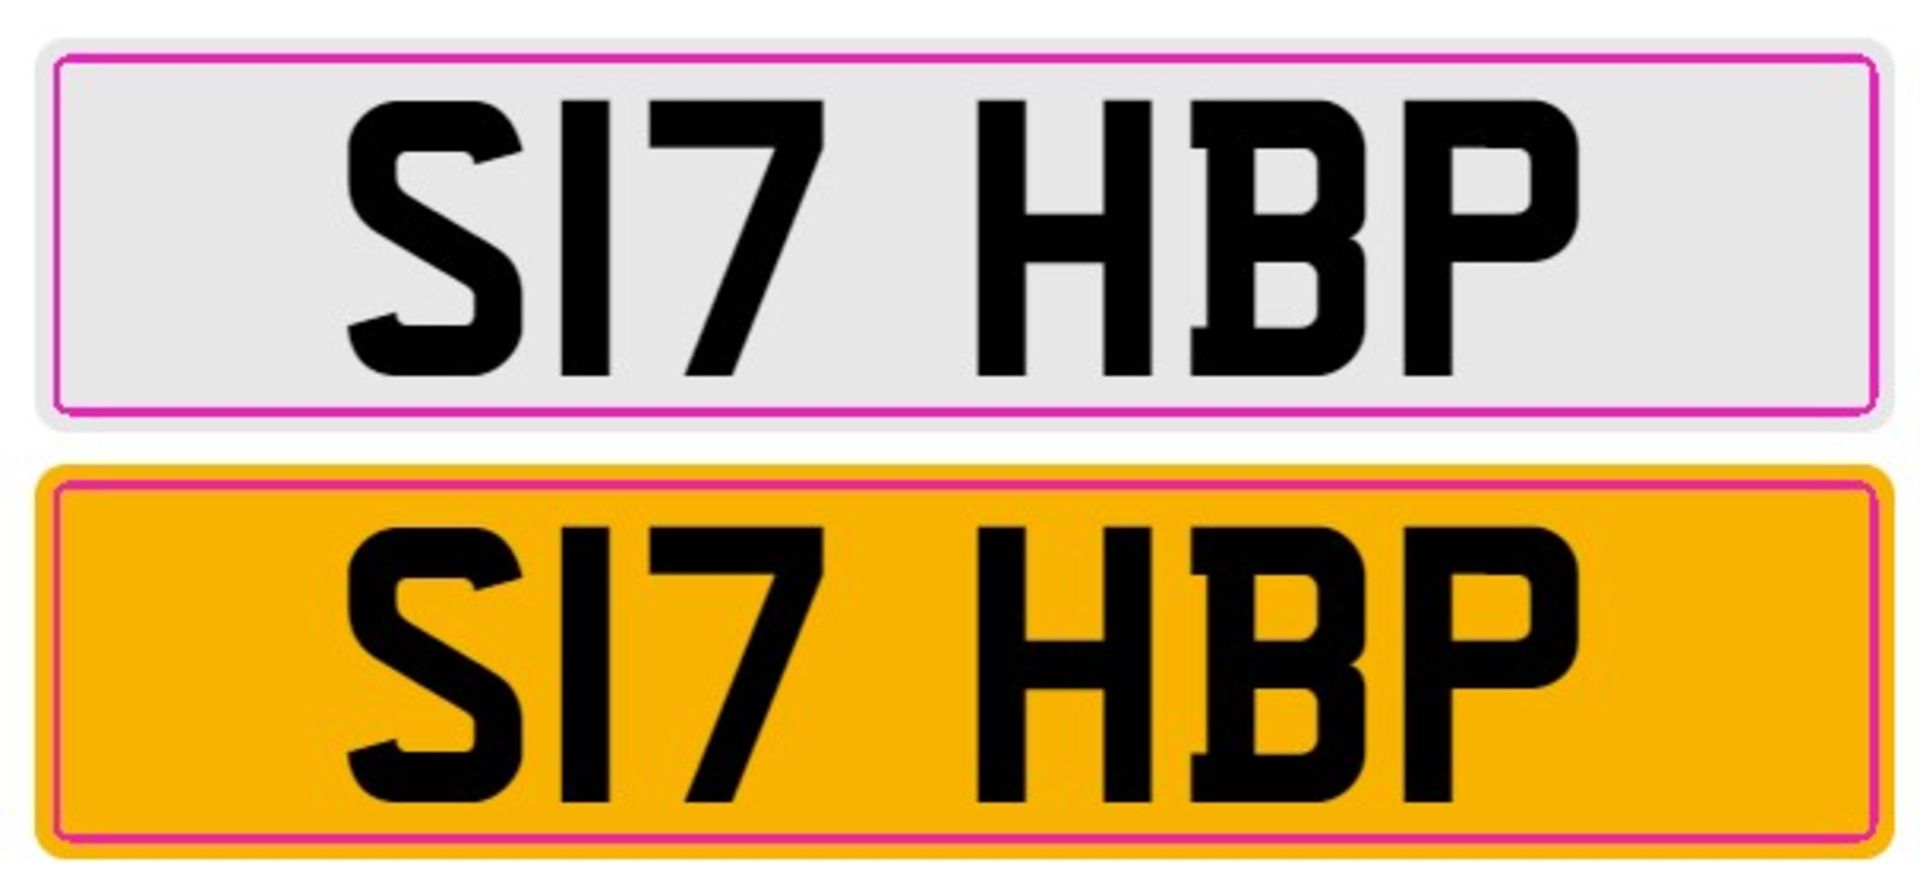 Cherished registration number.: .S17HBP An administration fee of £80 + VAT will be added to the sale